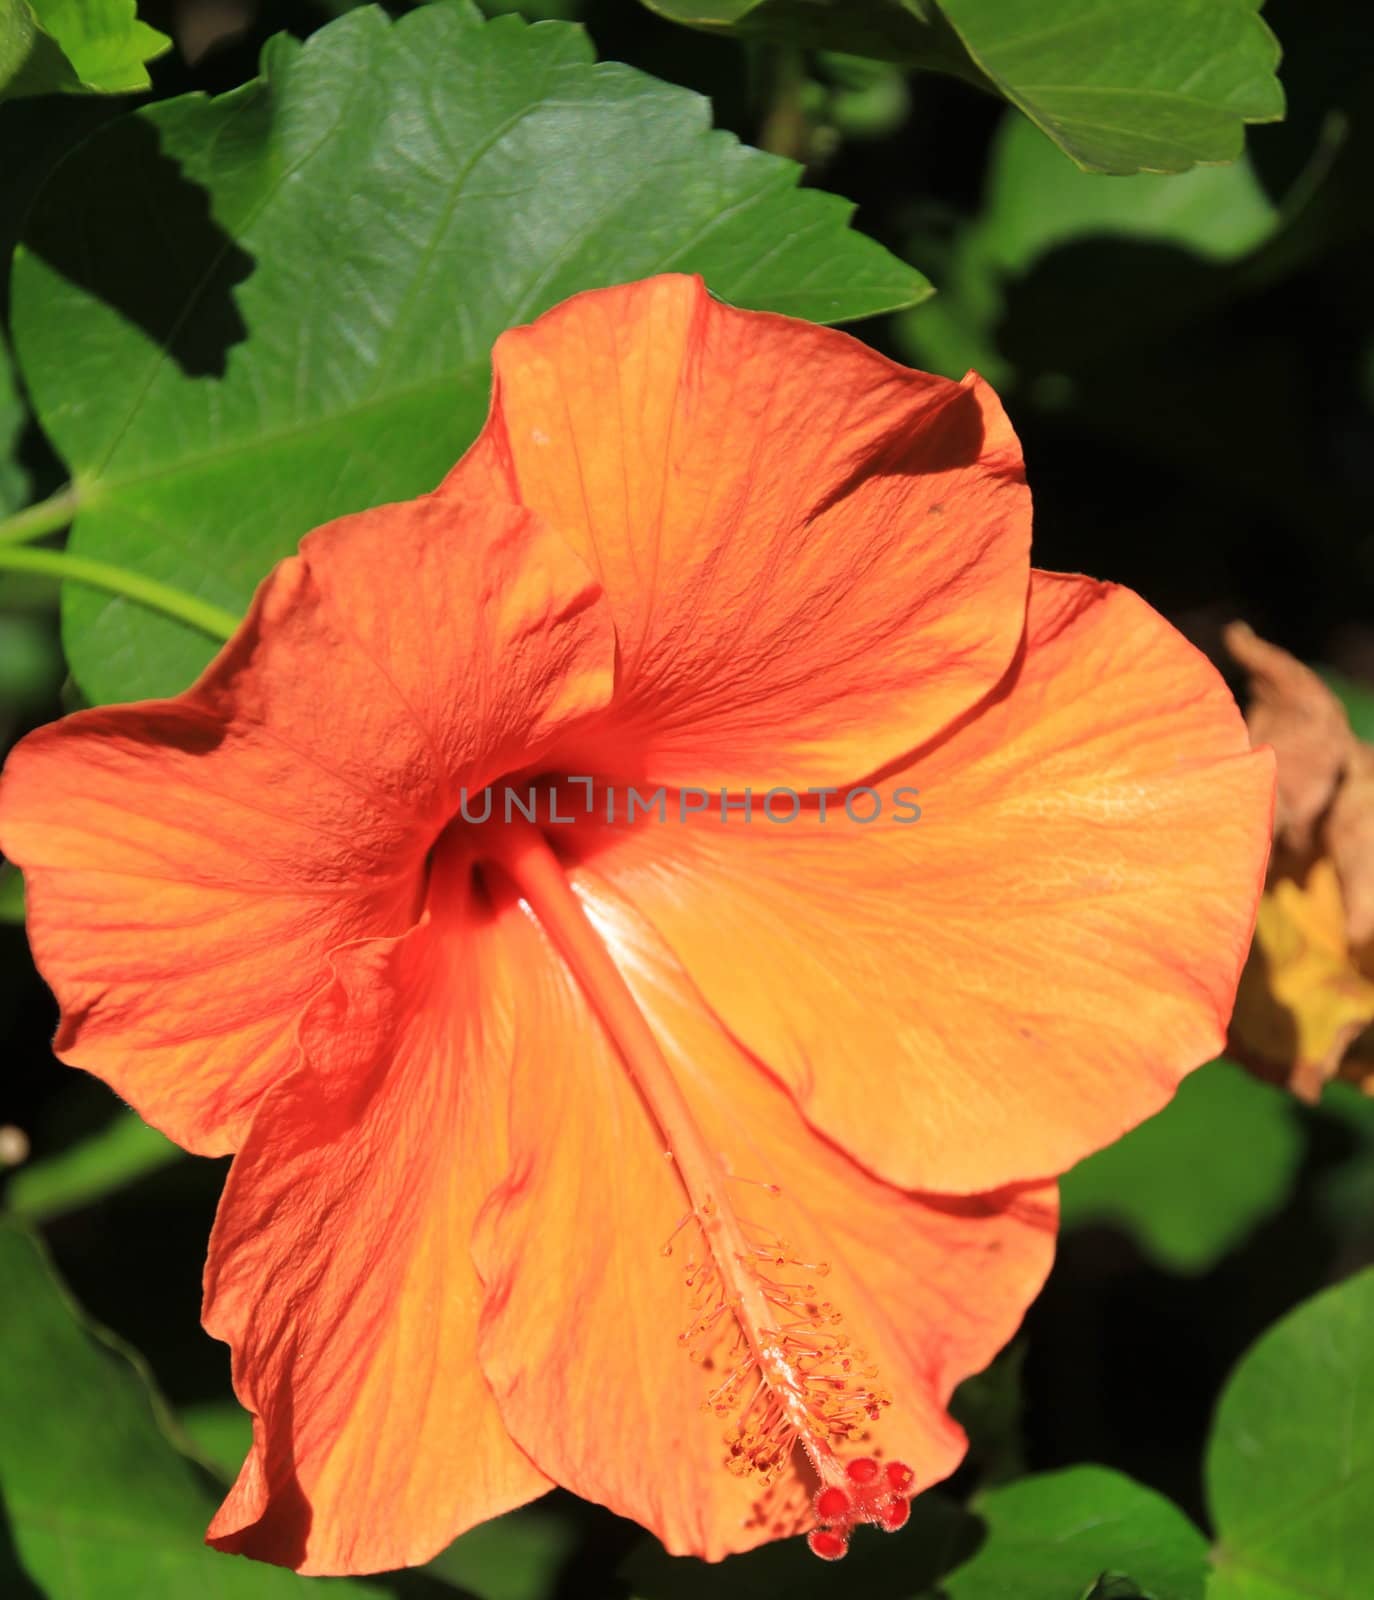 Orange hibiscus flower with green leaves in a garden